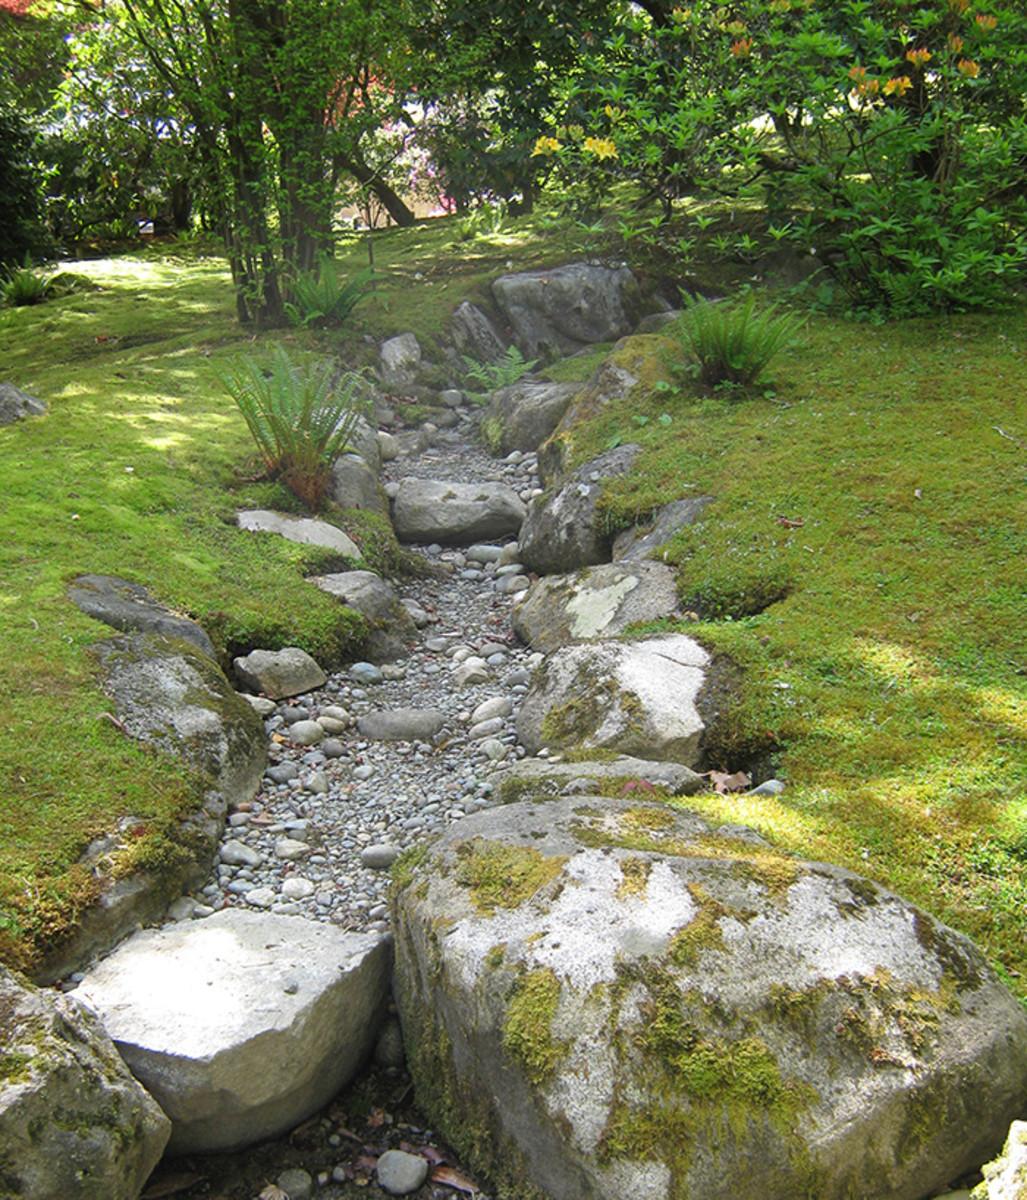 A constructed dry streambed looks natural because it uses different sizes of stones and incorporates gentle curves. In dry times it's a pretty element; in heavy rain it facilitates drainage from the site.